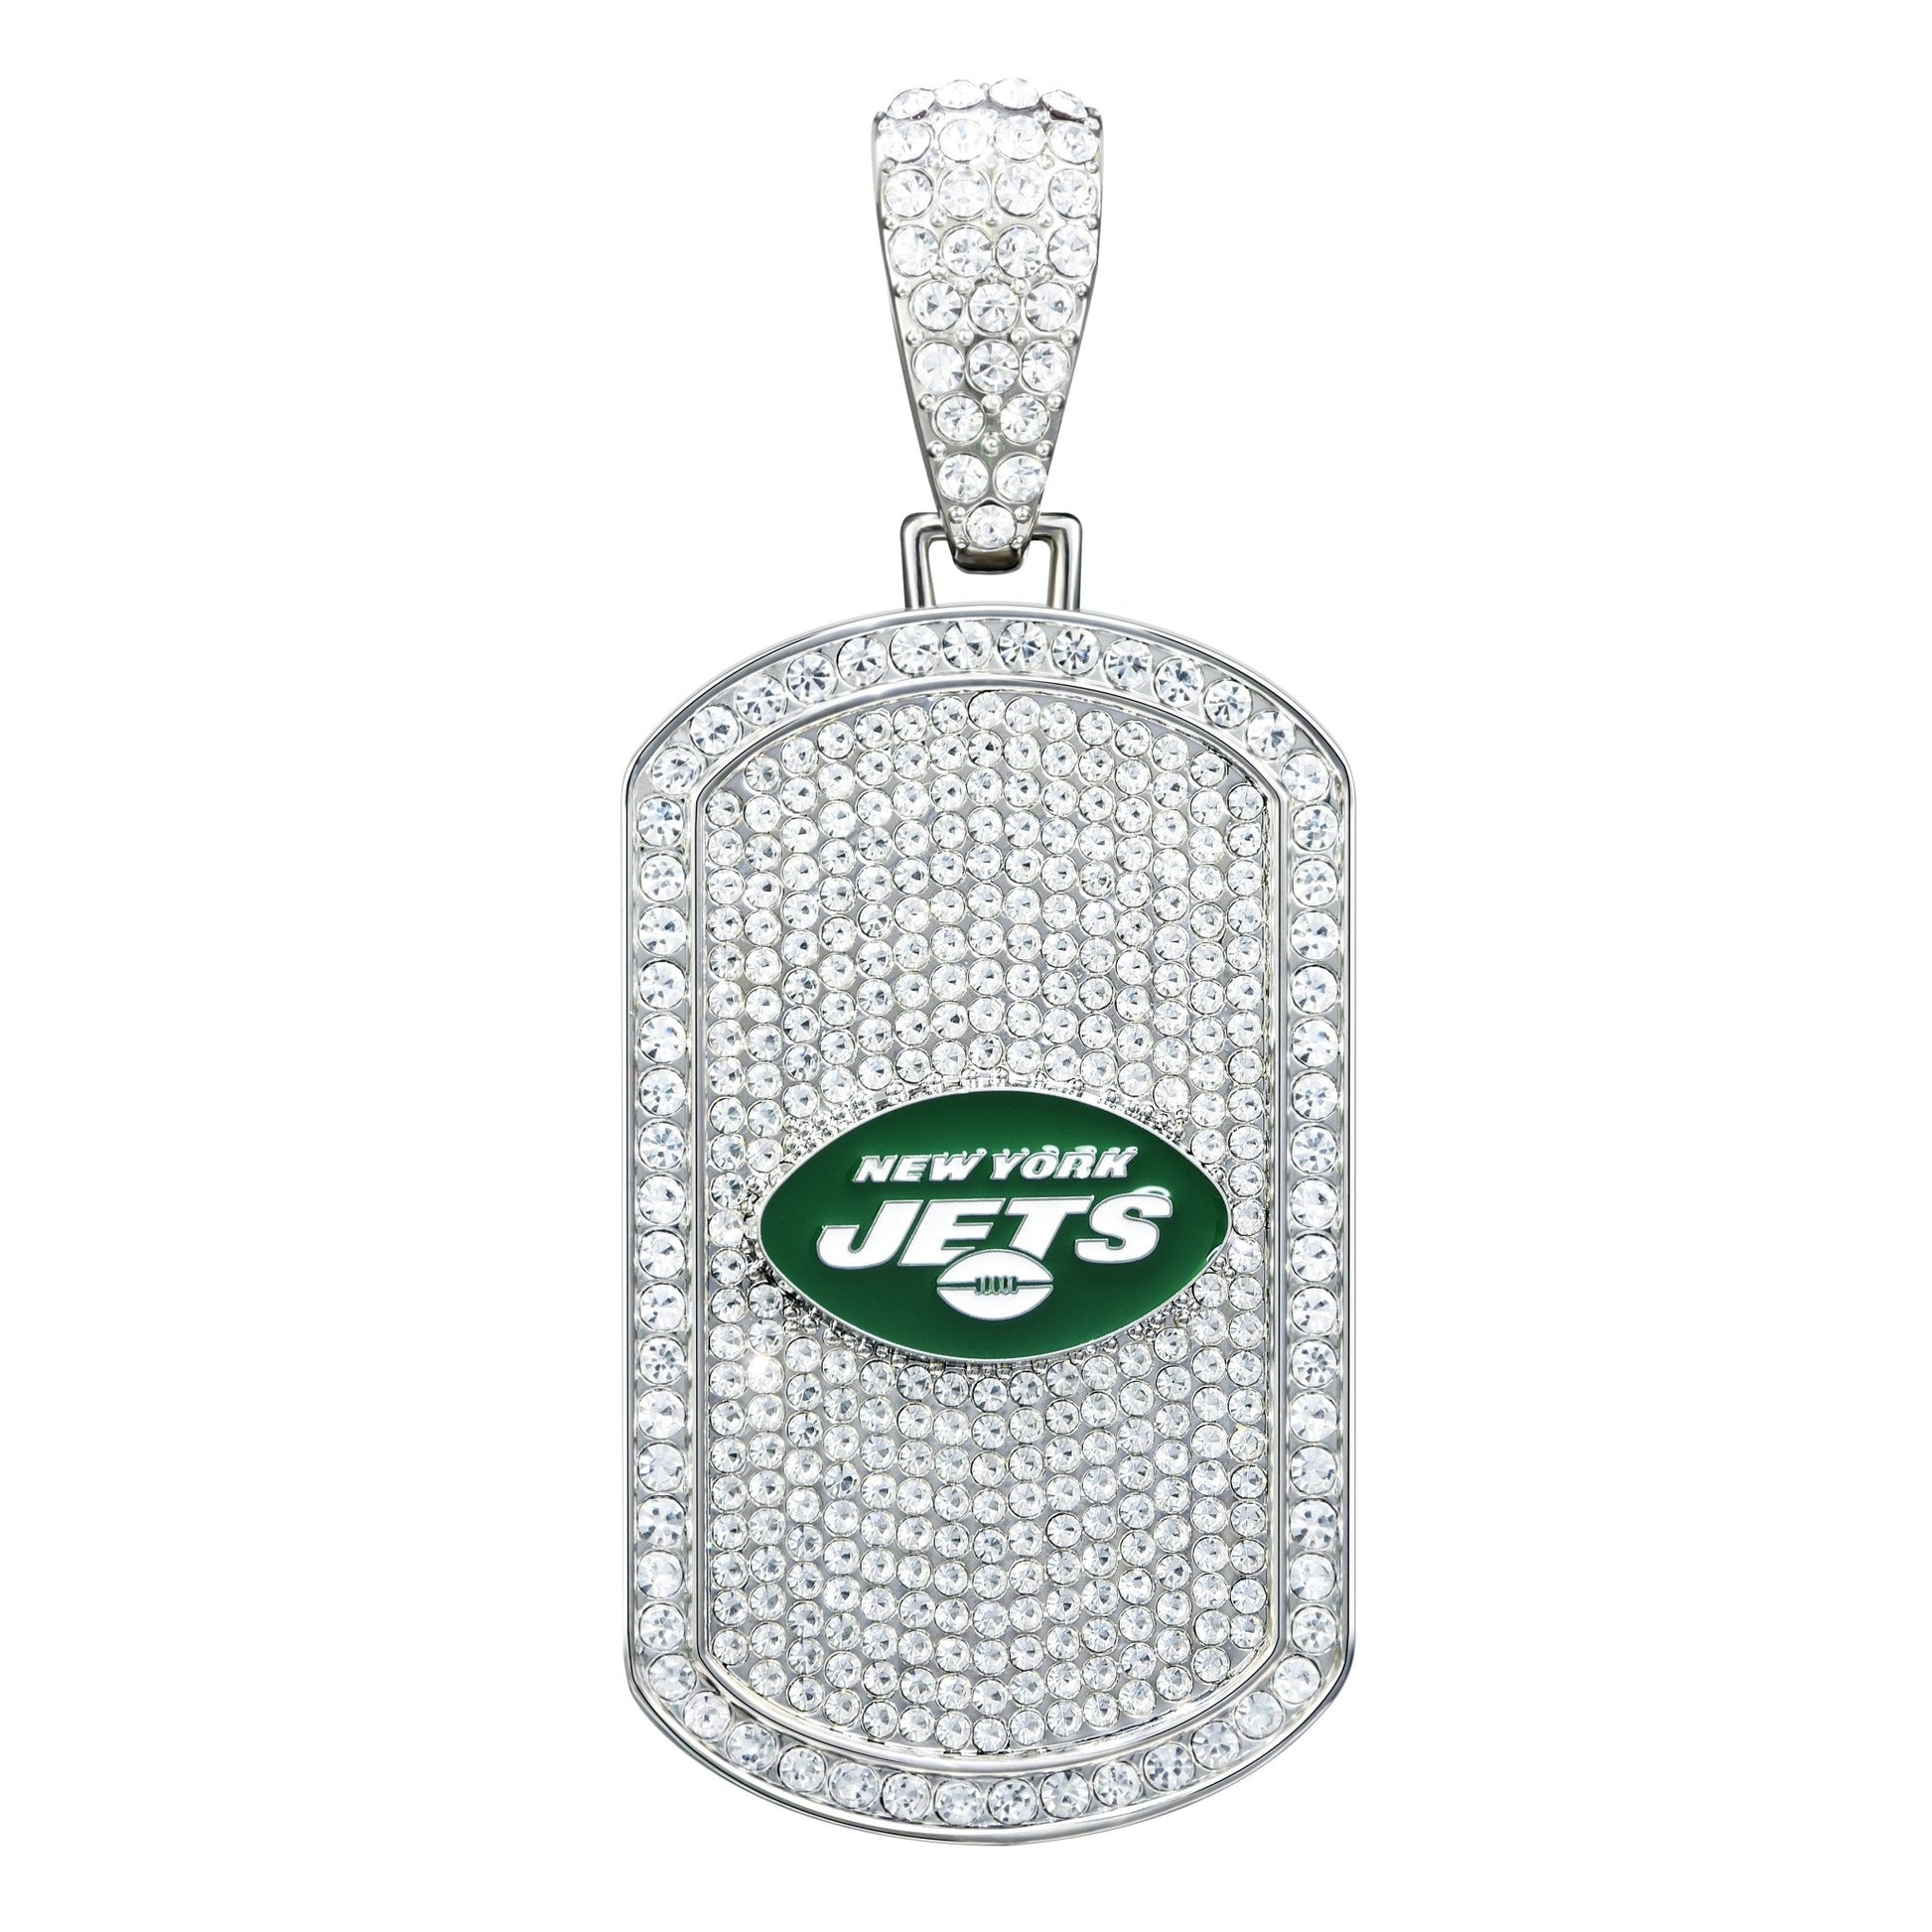 NFL Bling Dog Tag Necklace - Gamedays Gear - New York Jets